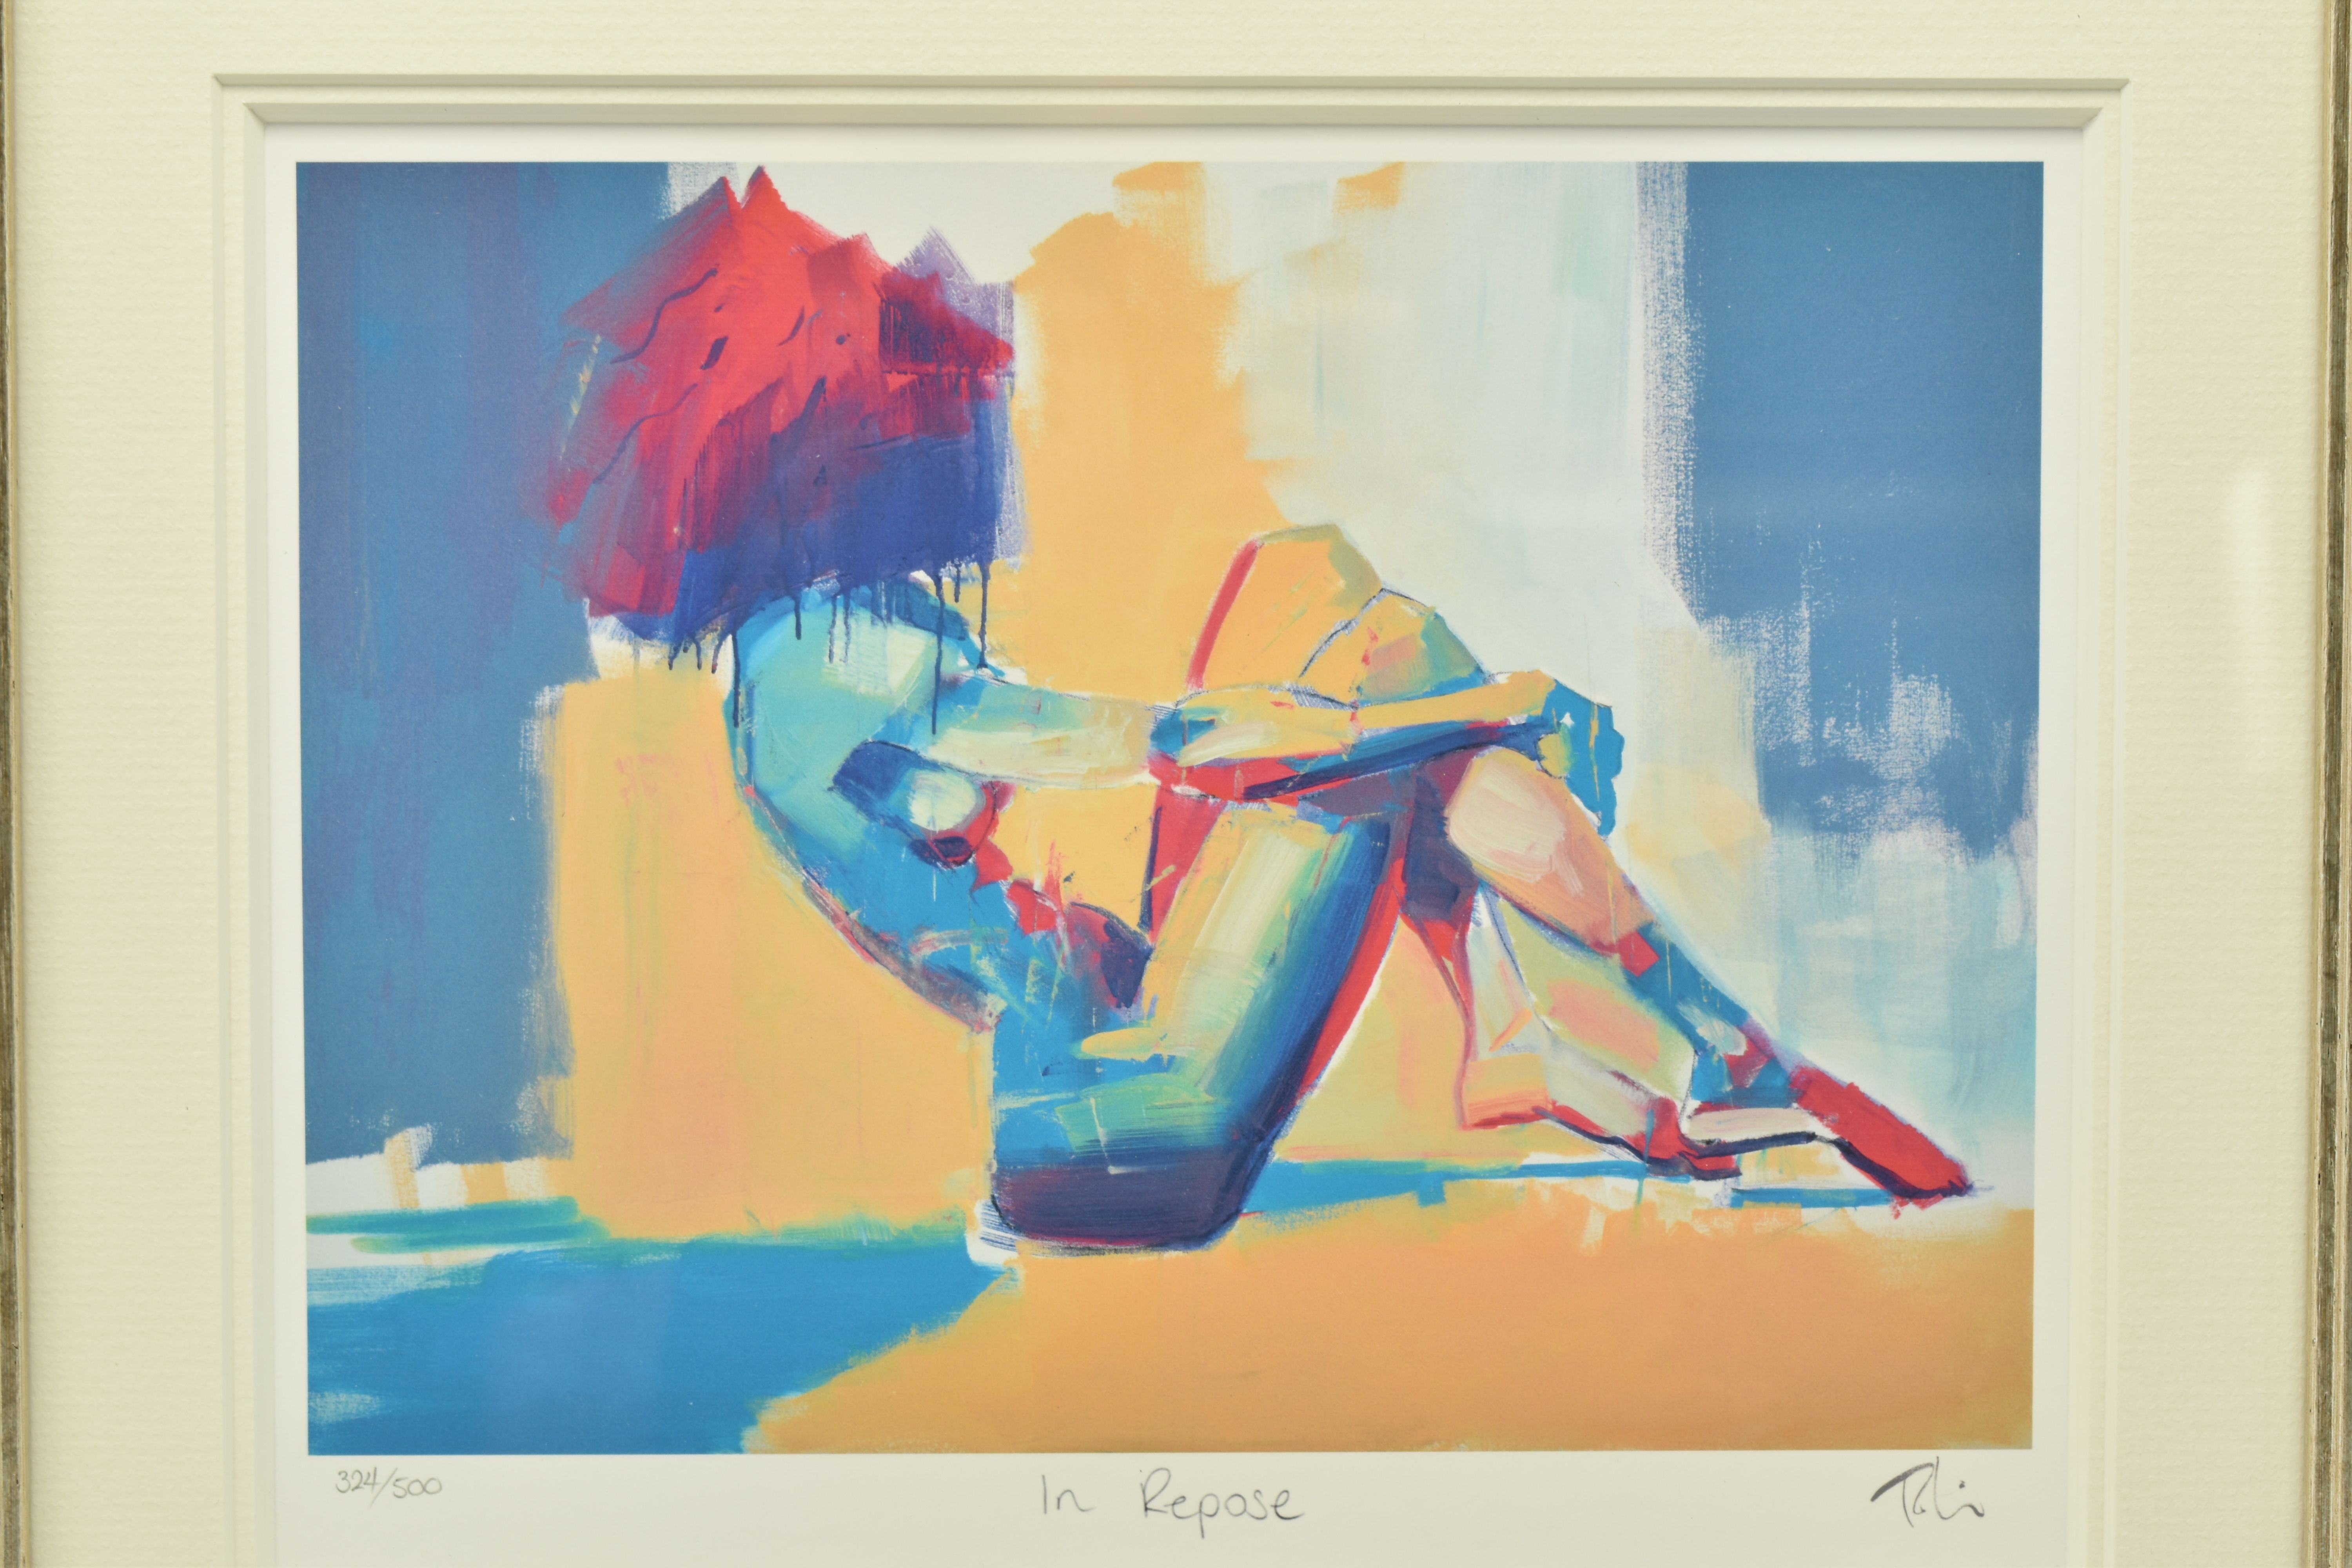 TOBY MULLIGAN (BRITISH 1969) 'IN REPOSE', a signed limited edition print on paper depicting a - Image 2 of 4